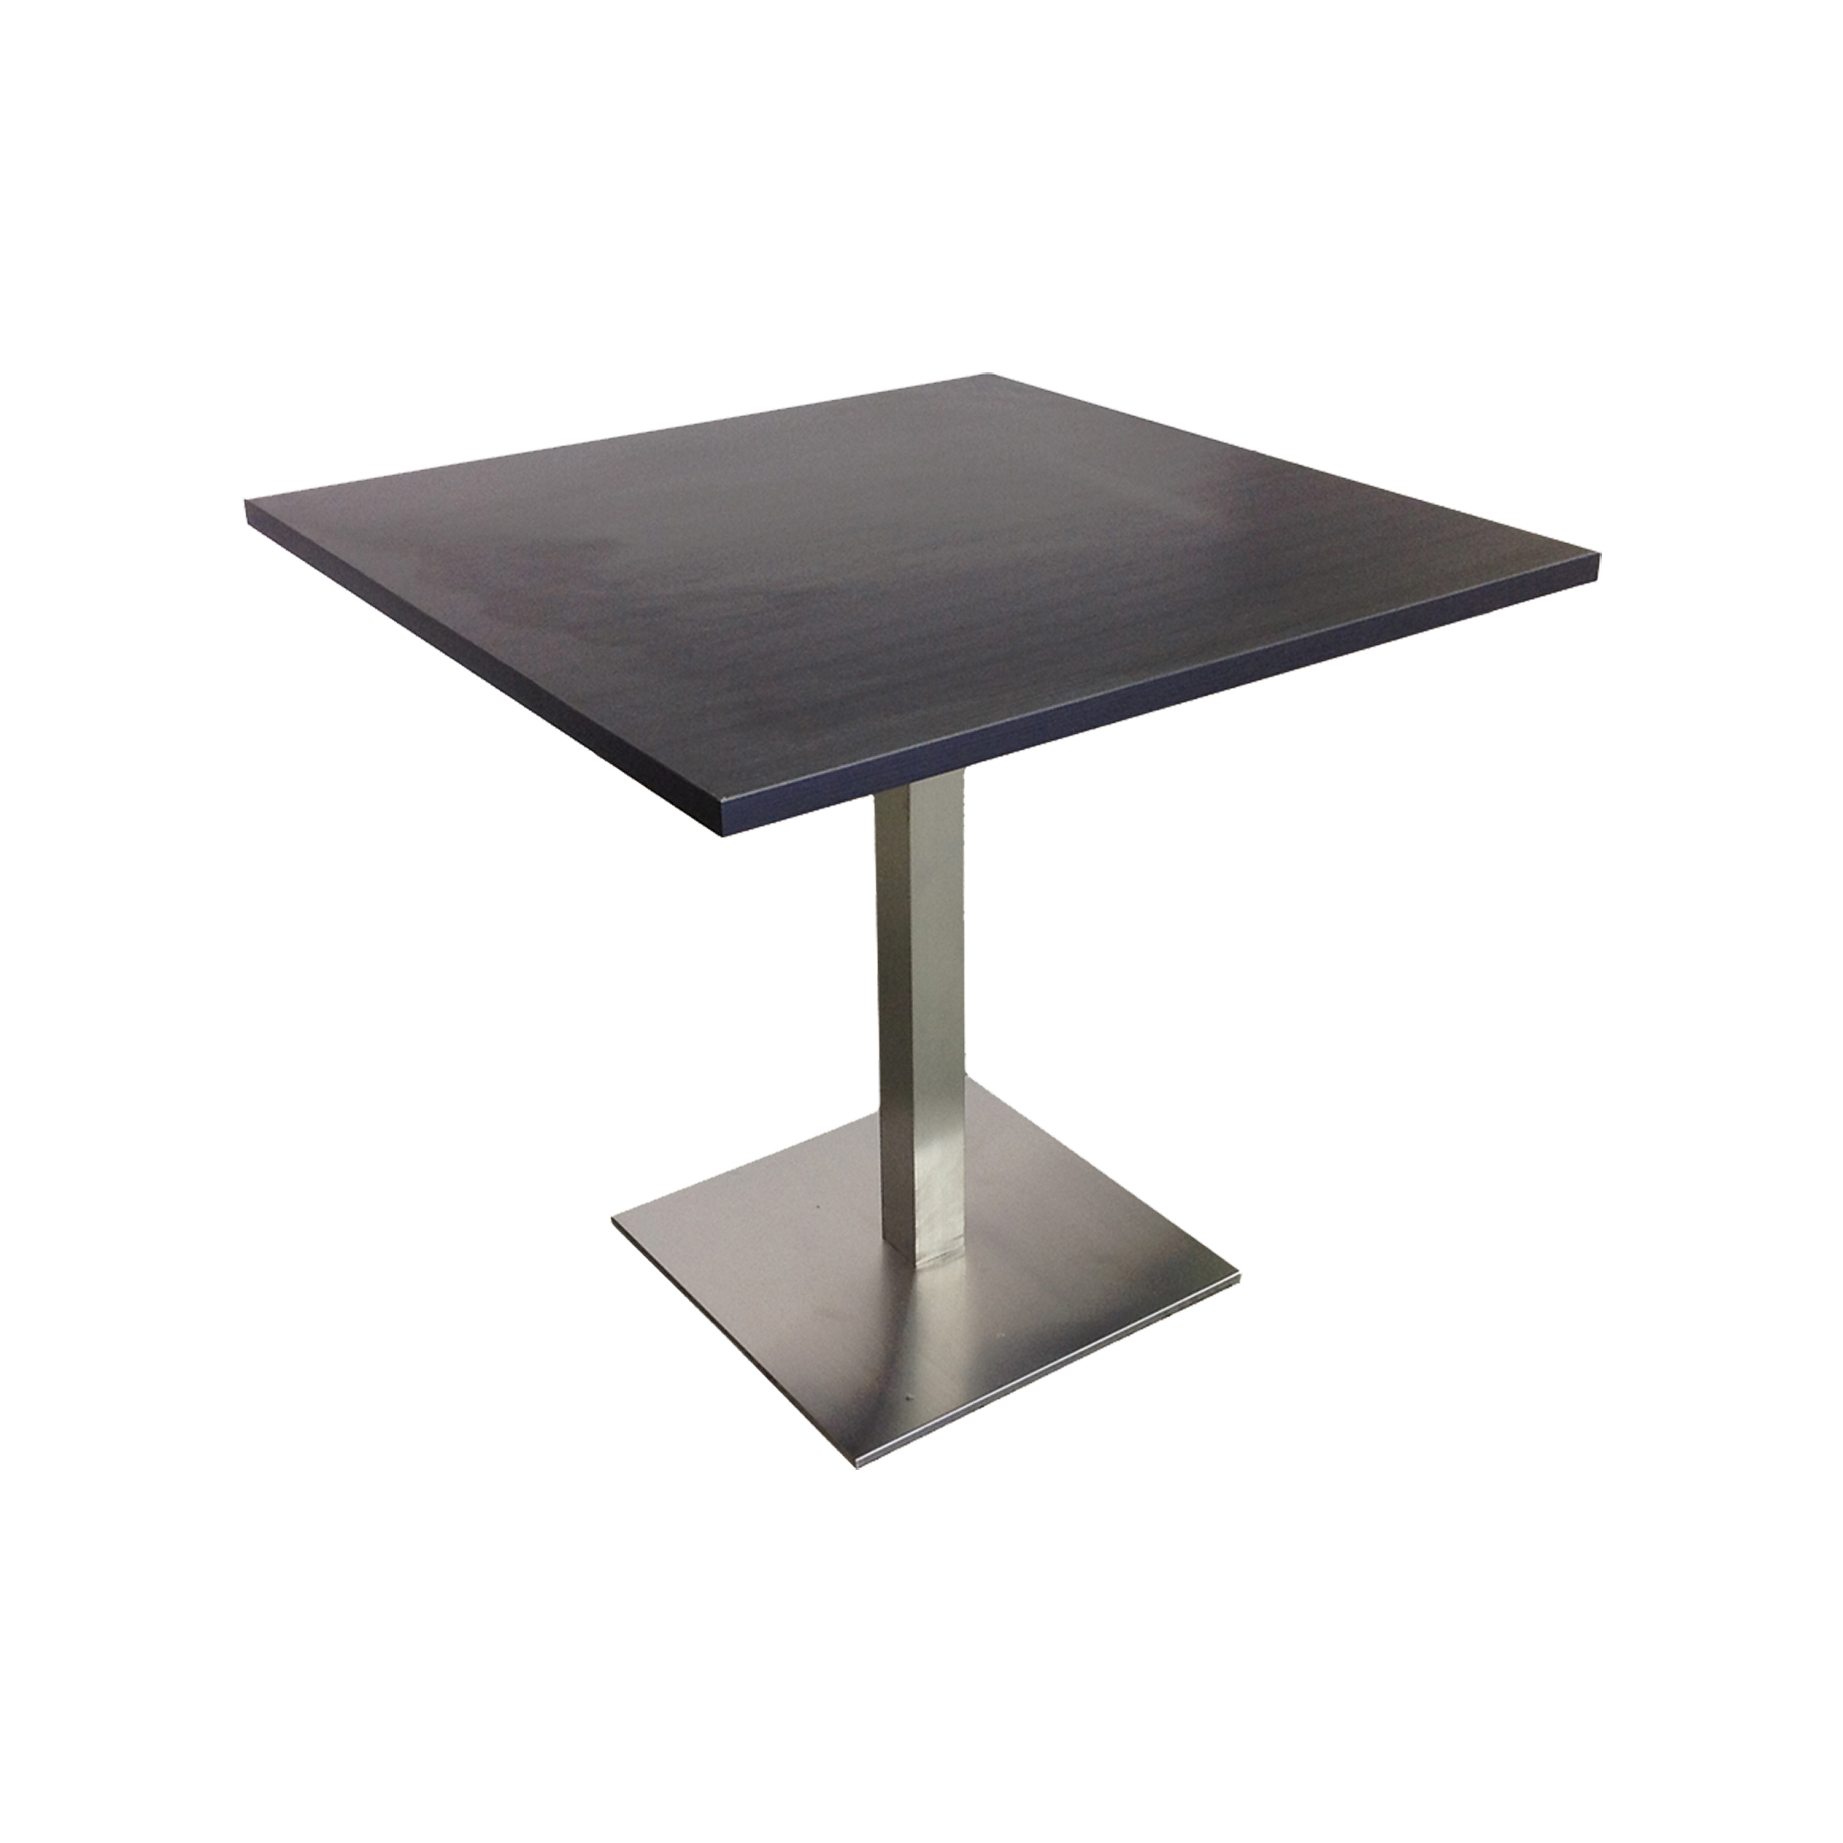 Educated furniture pavo table for school staffroom or lunchroom